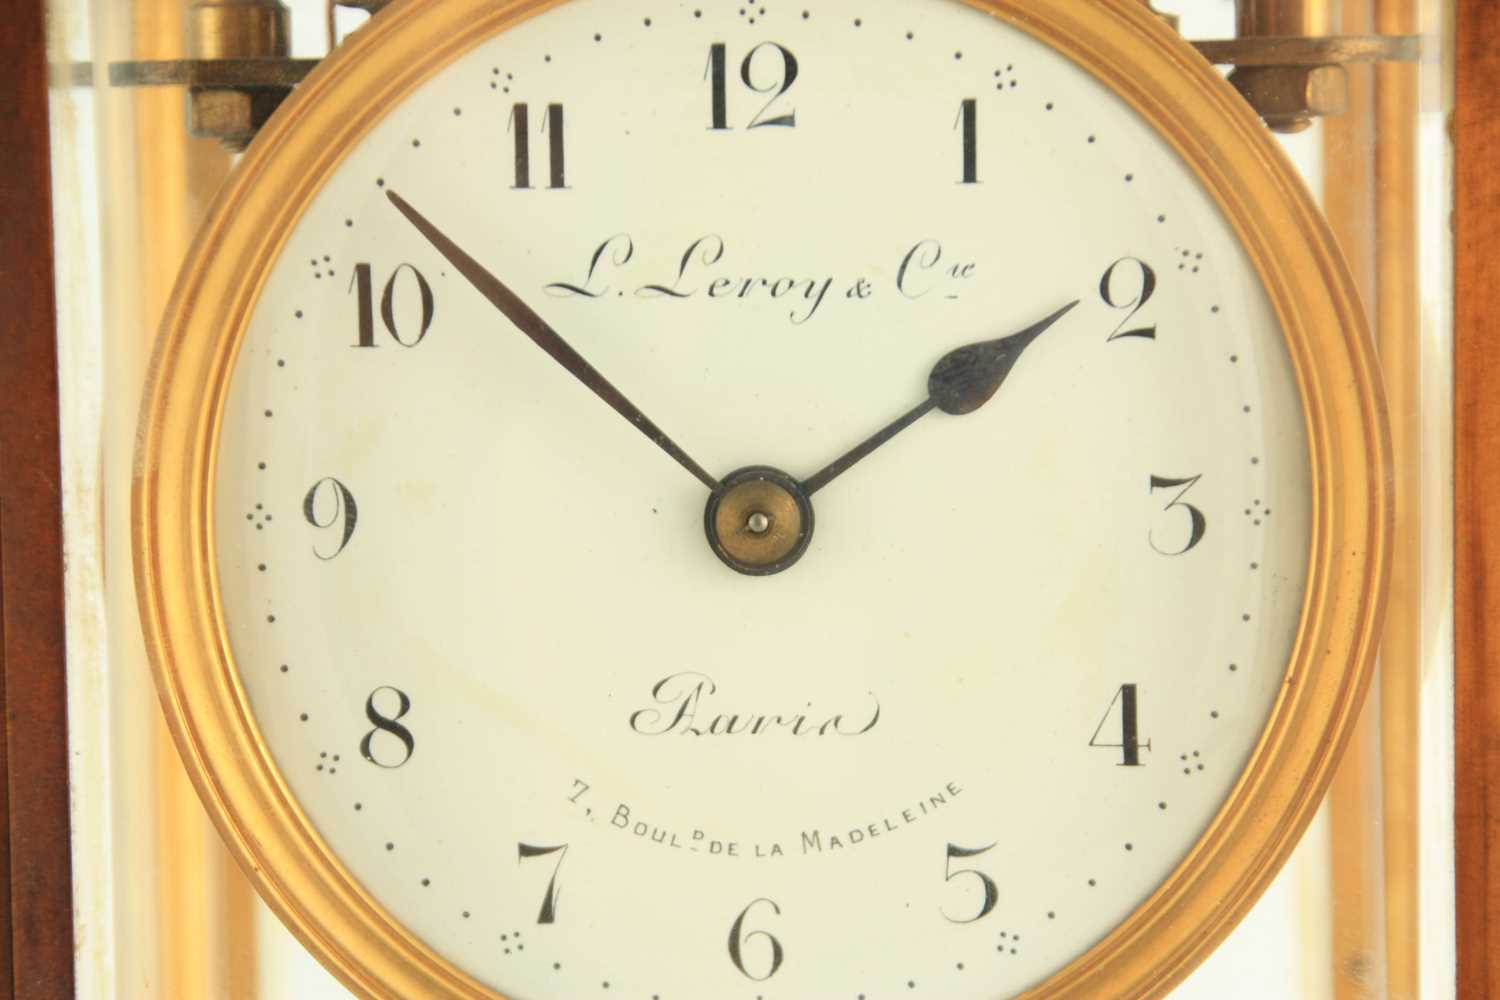 L. LEROY & CO. PARIS A RARE AND GOOD QUALITY EARLY 20TH CENTURY ELECTRIC FOUR-GLASS MANTEL CLOCK - Image 4 of 5